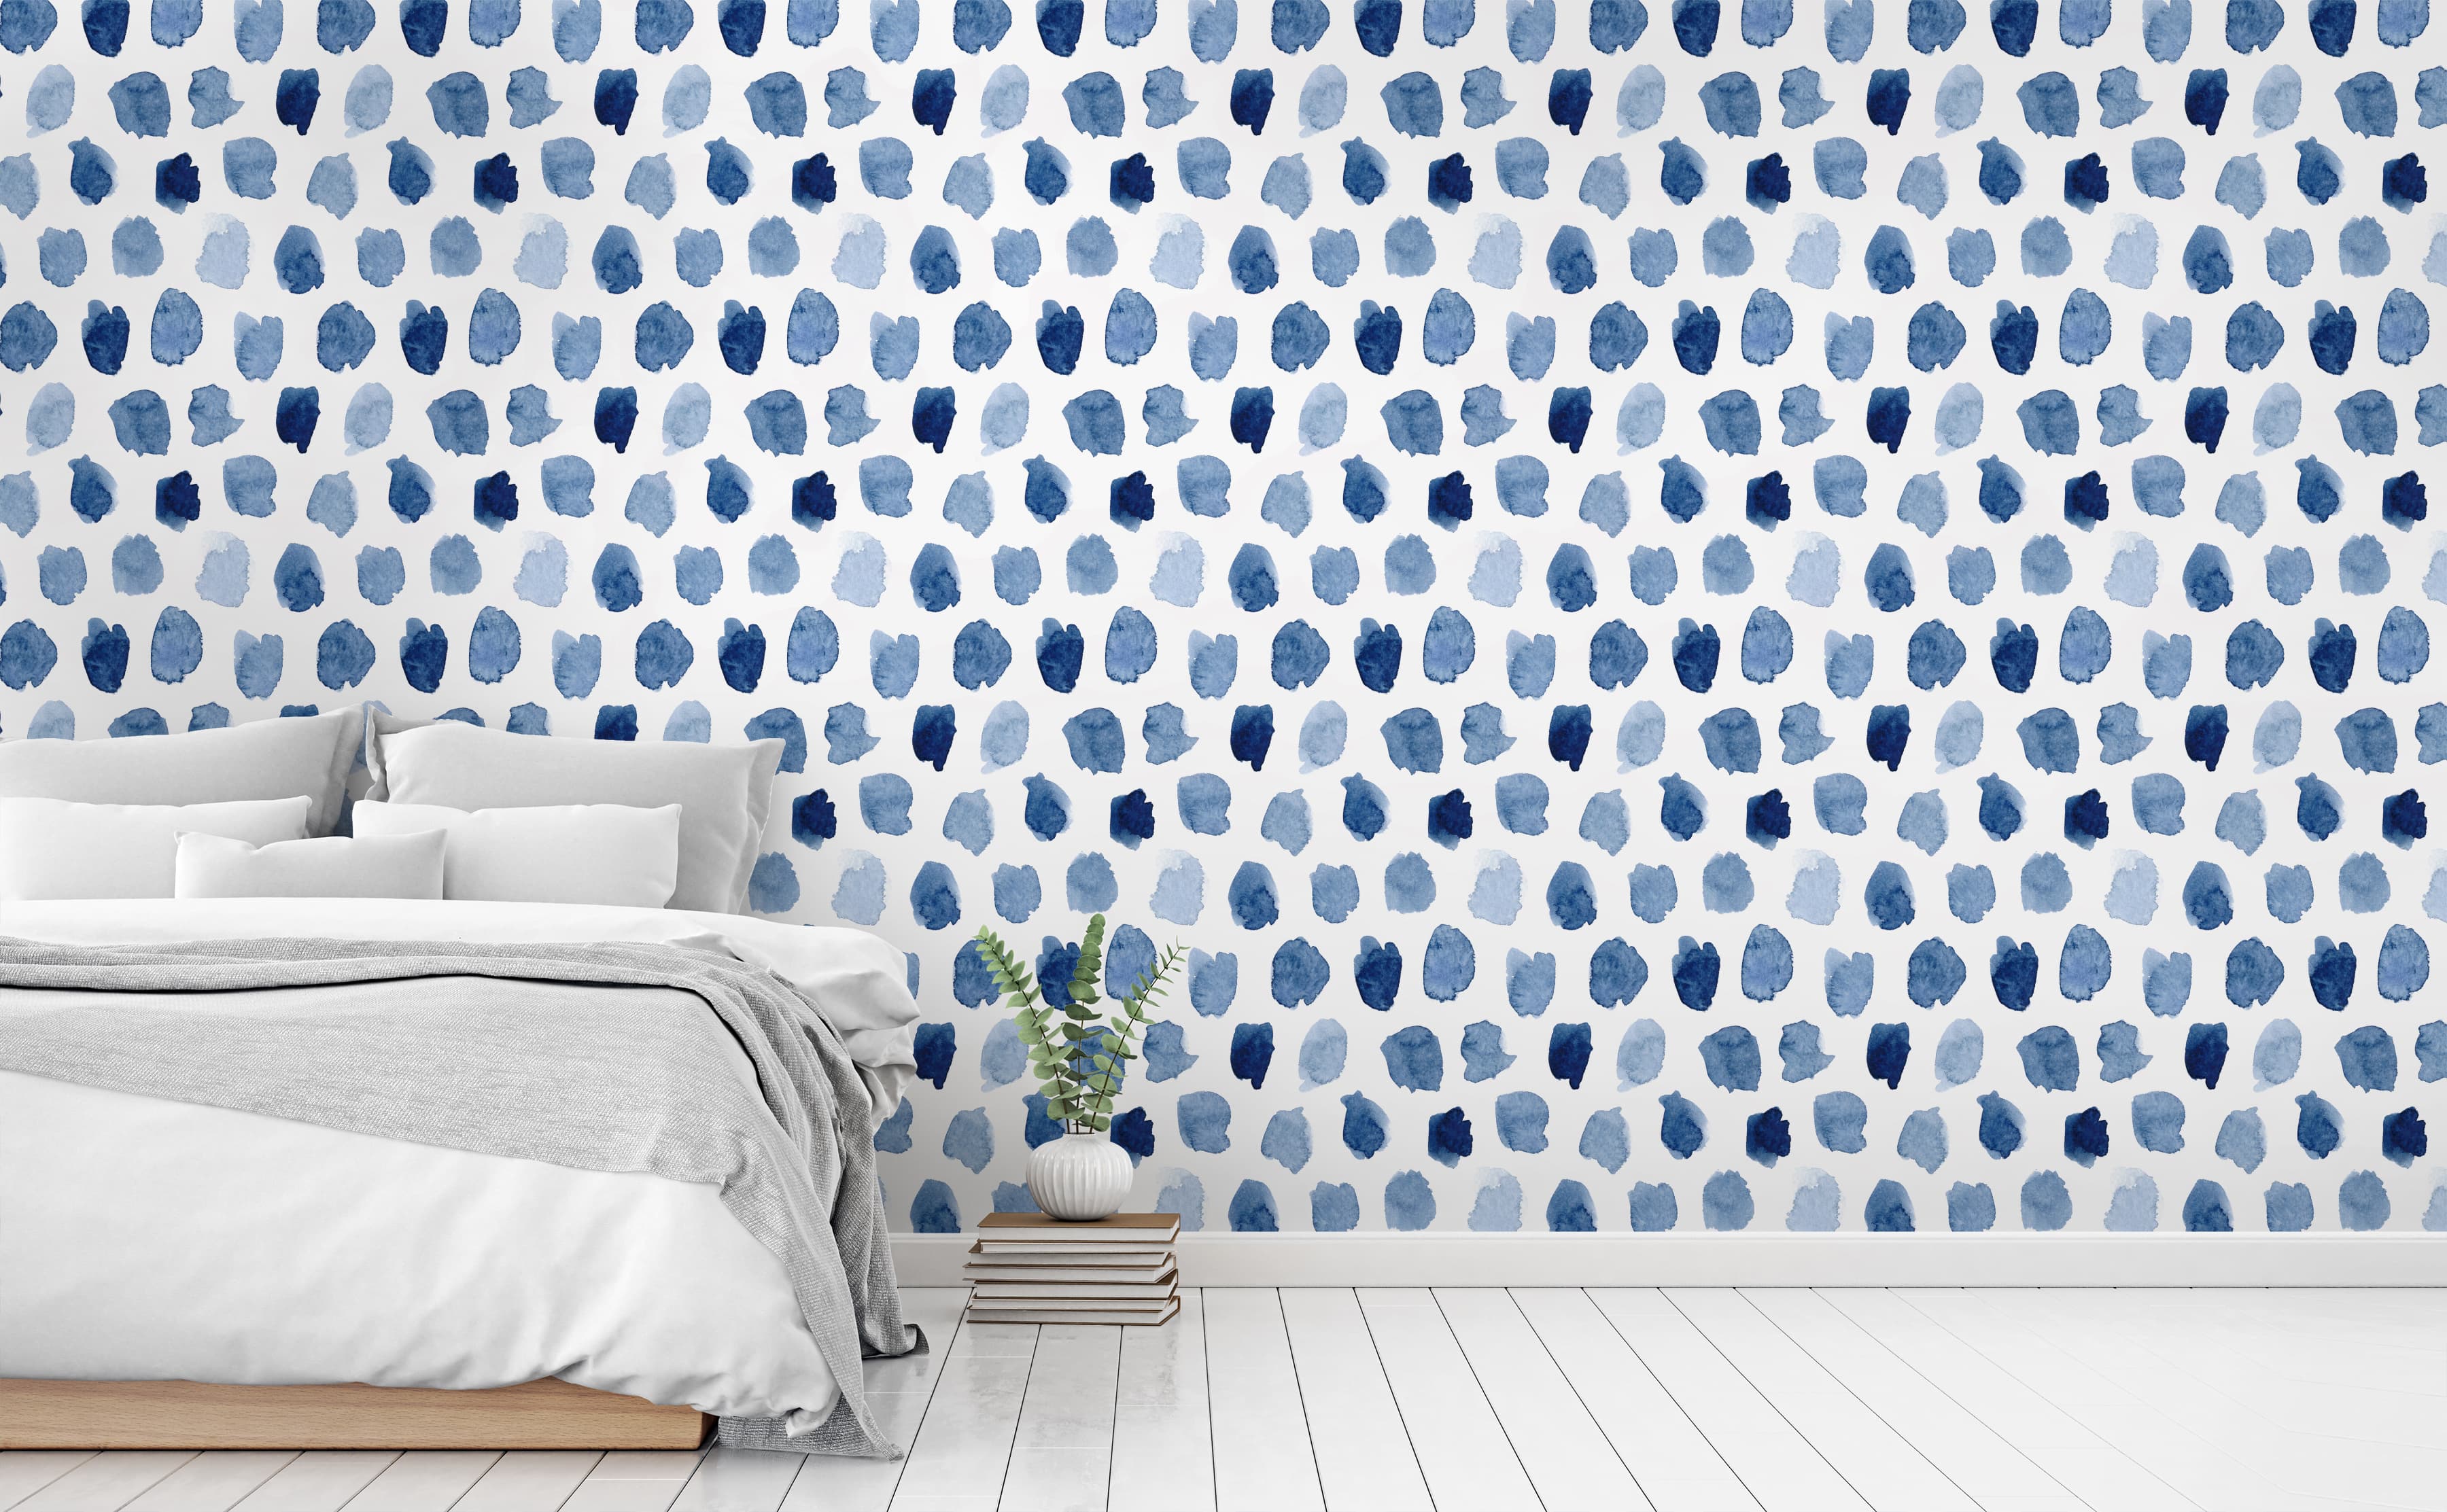 Abstract cartoon blue white background wallpaper Vector Image